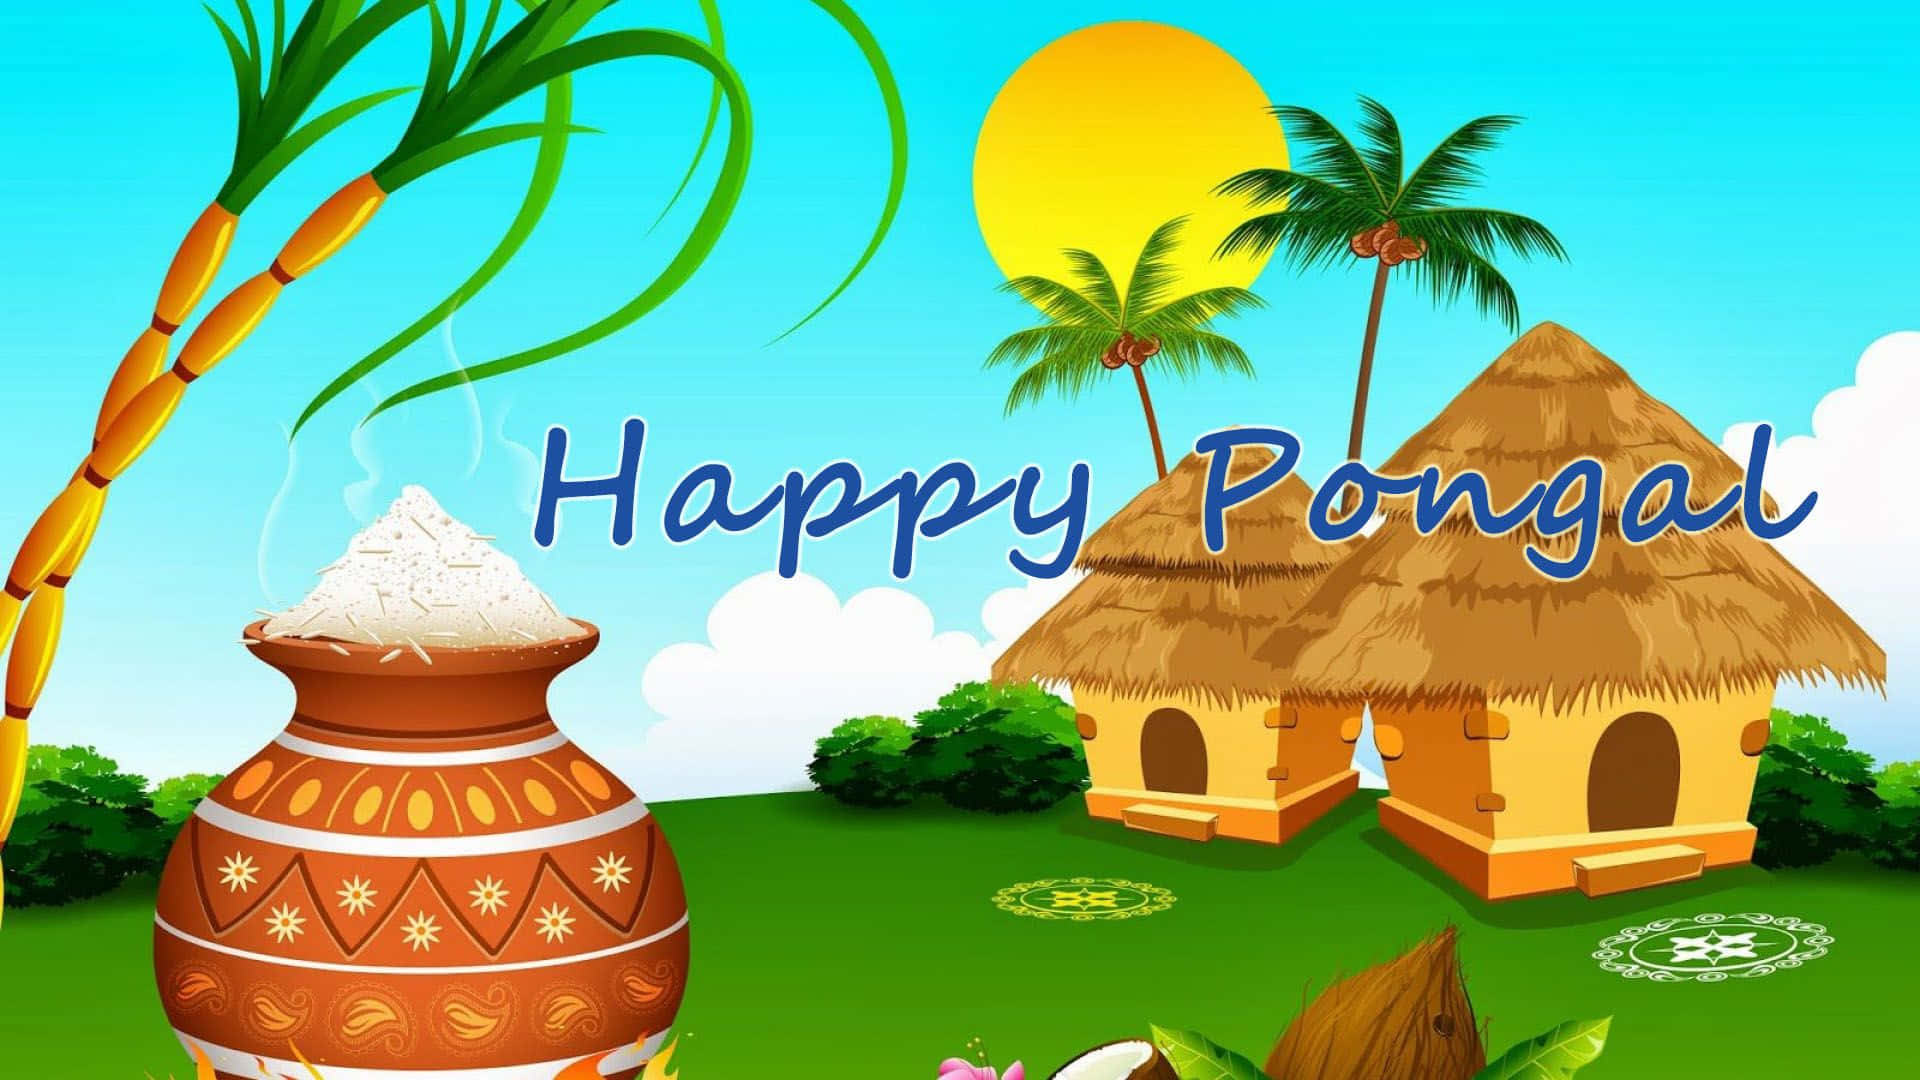 Celebrating Pongal, A Festival of Happiness